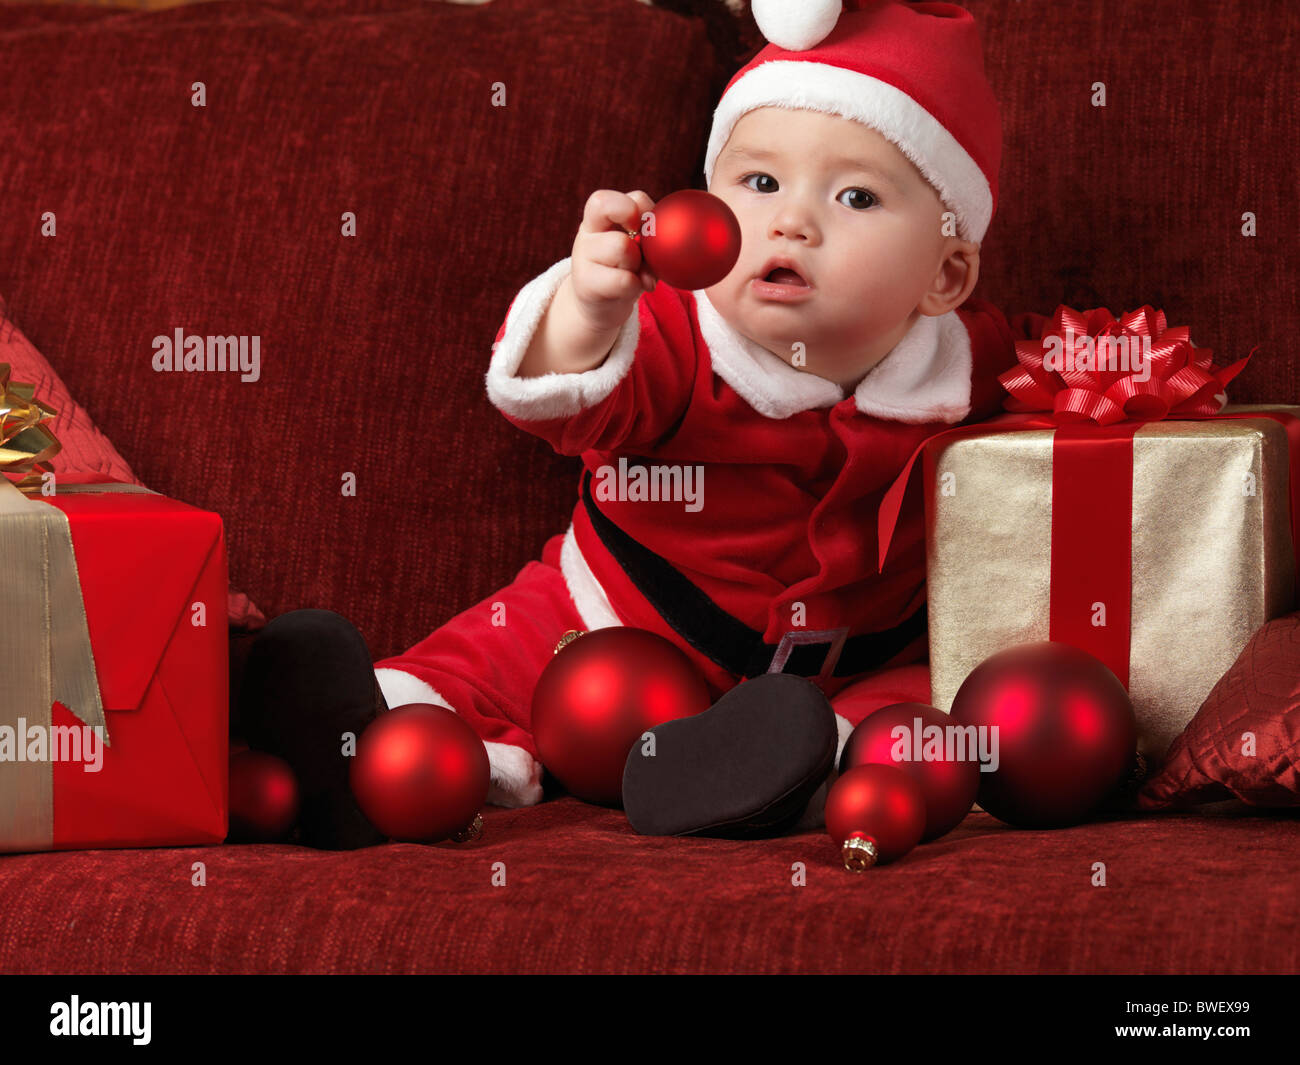 License available at MaximImages.com - Six month old baby boy wearing Santa Christmas costume and holding a red bauble in his hand Stock Photo